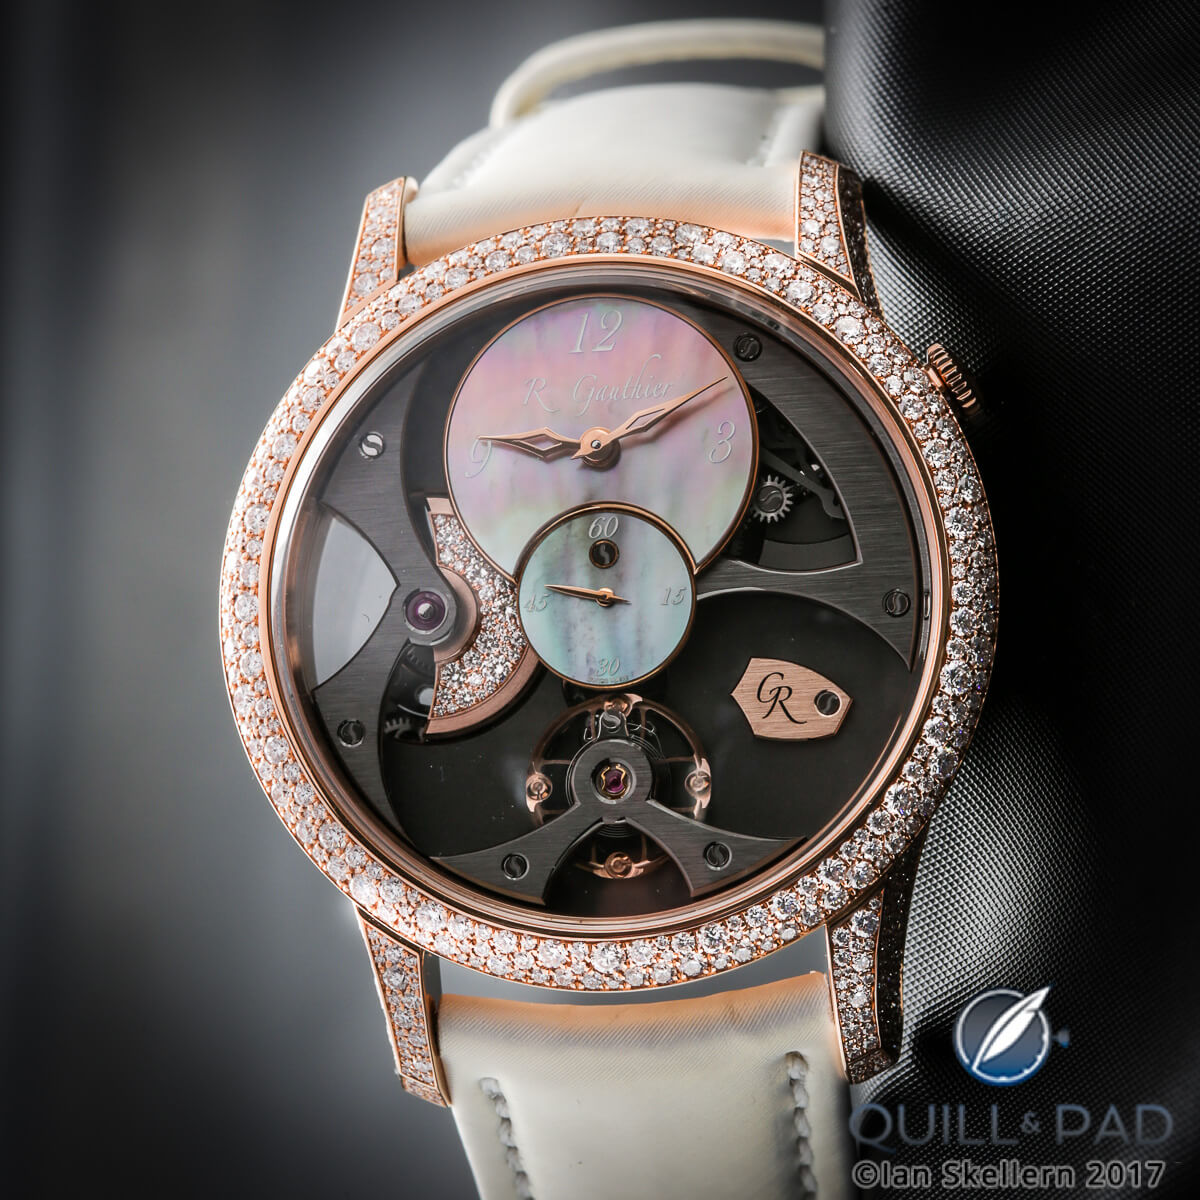 Romain Gauthier Insight Micro-Rotor with diamond-set bezel and rotor plus mother-of-pearl dial